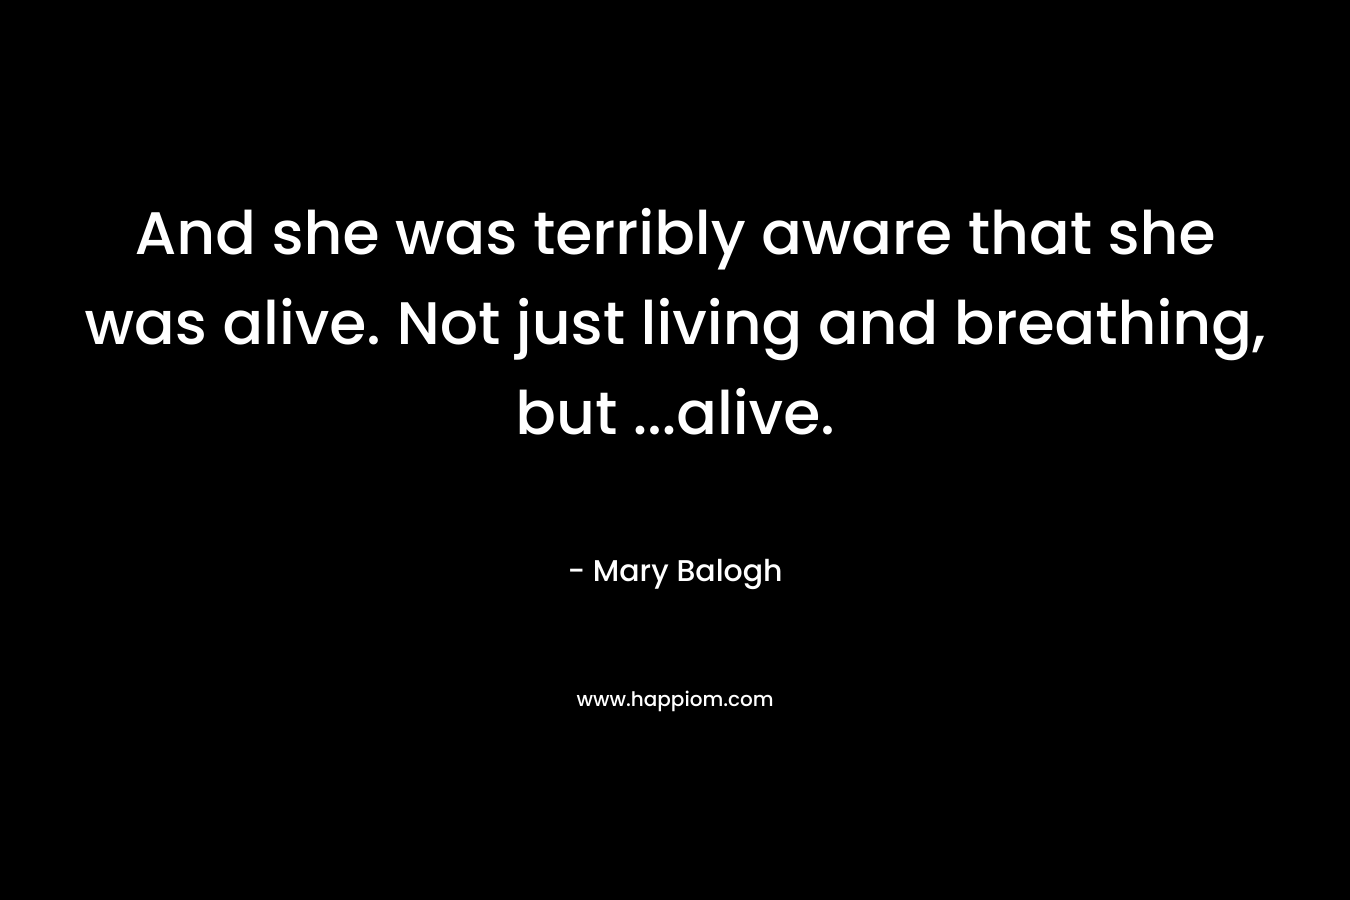 And she was terribly aware that she was alive. Not just living and breathing, but …alive. – Mary Balogh